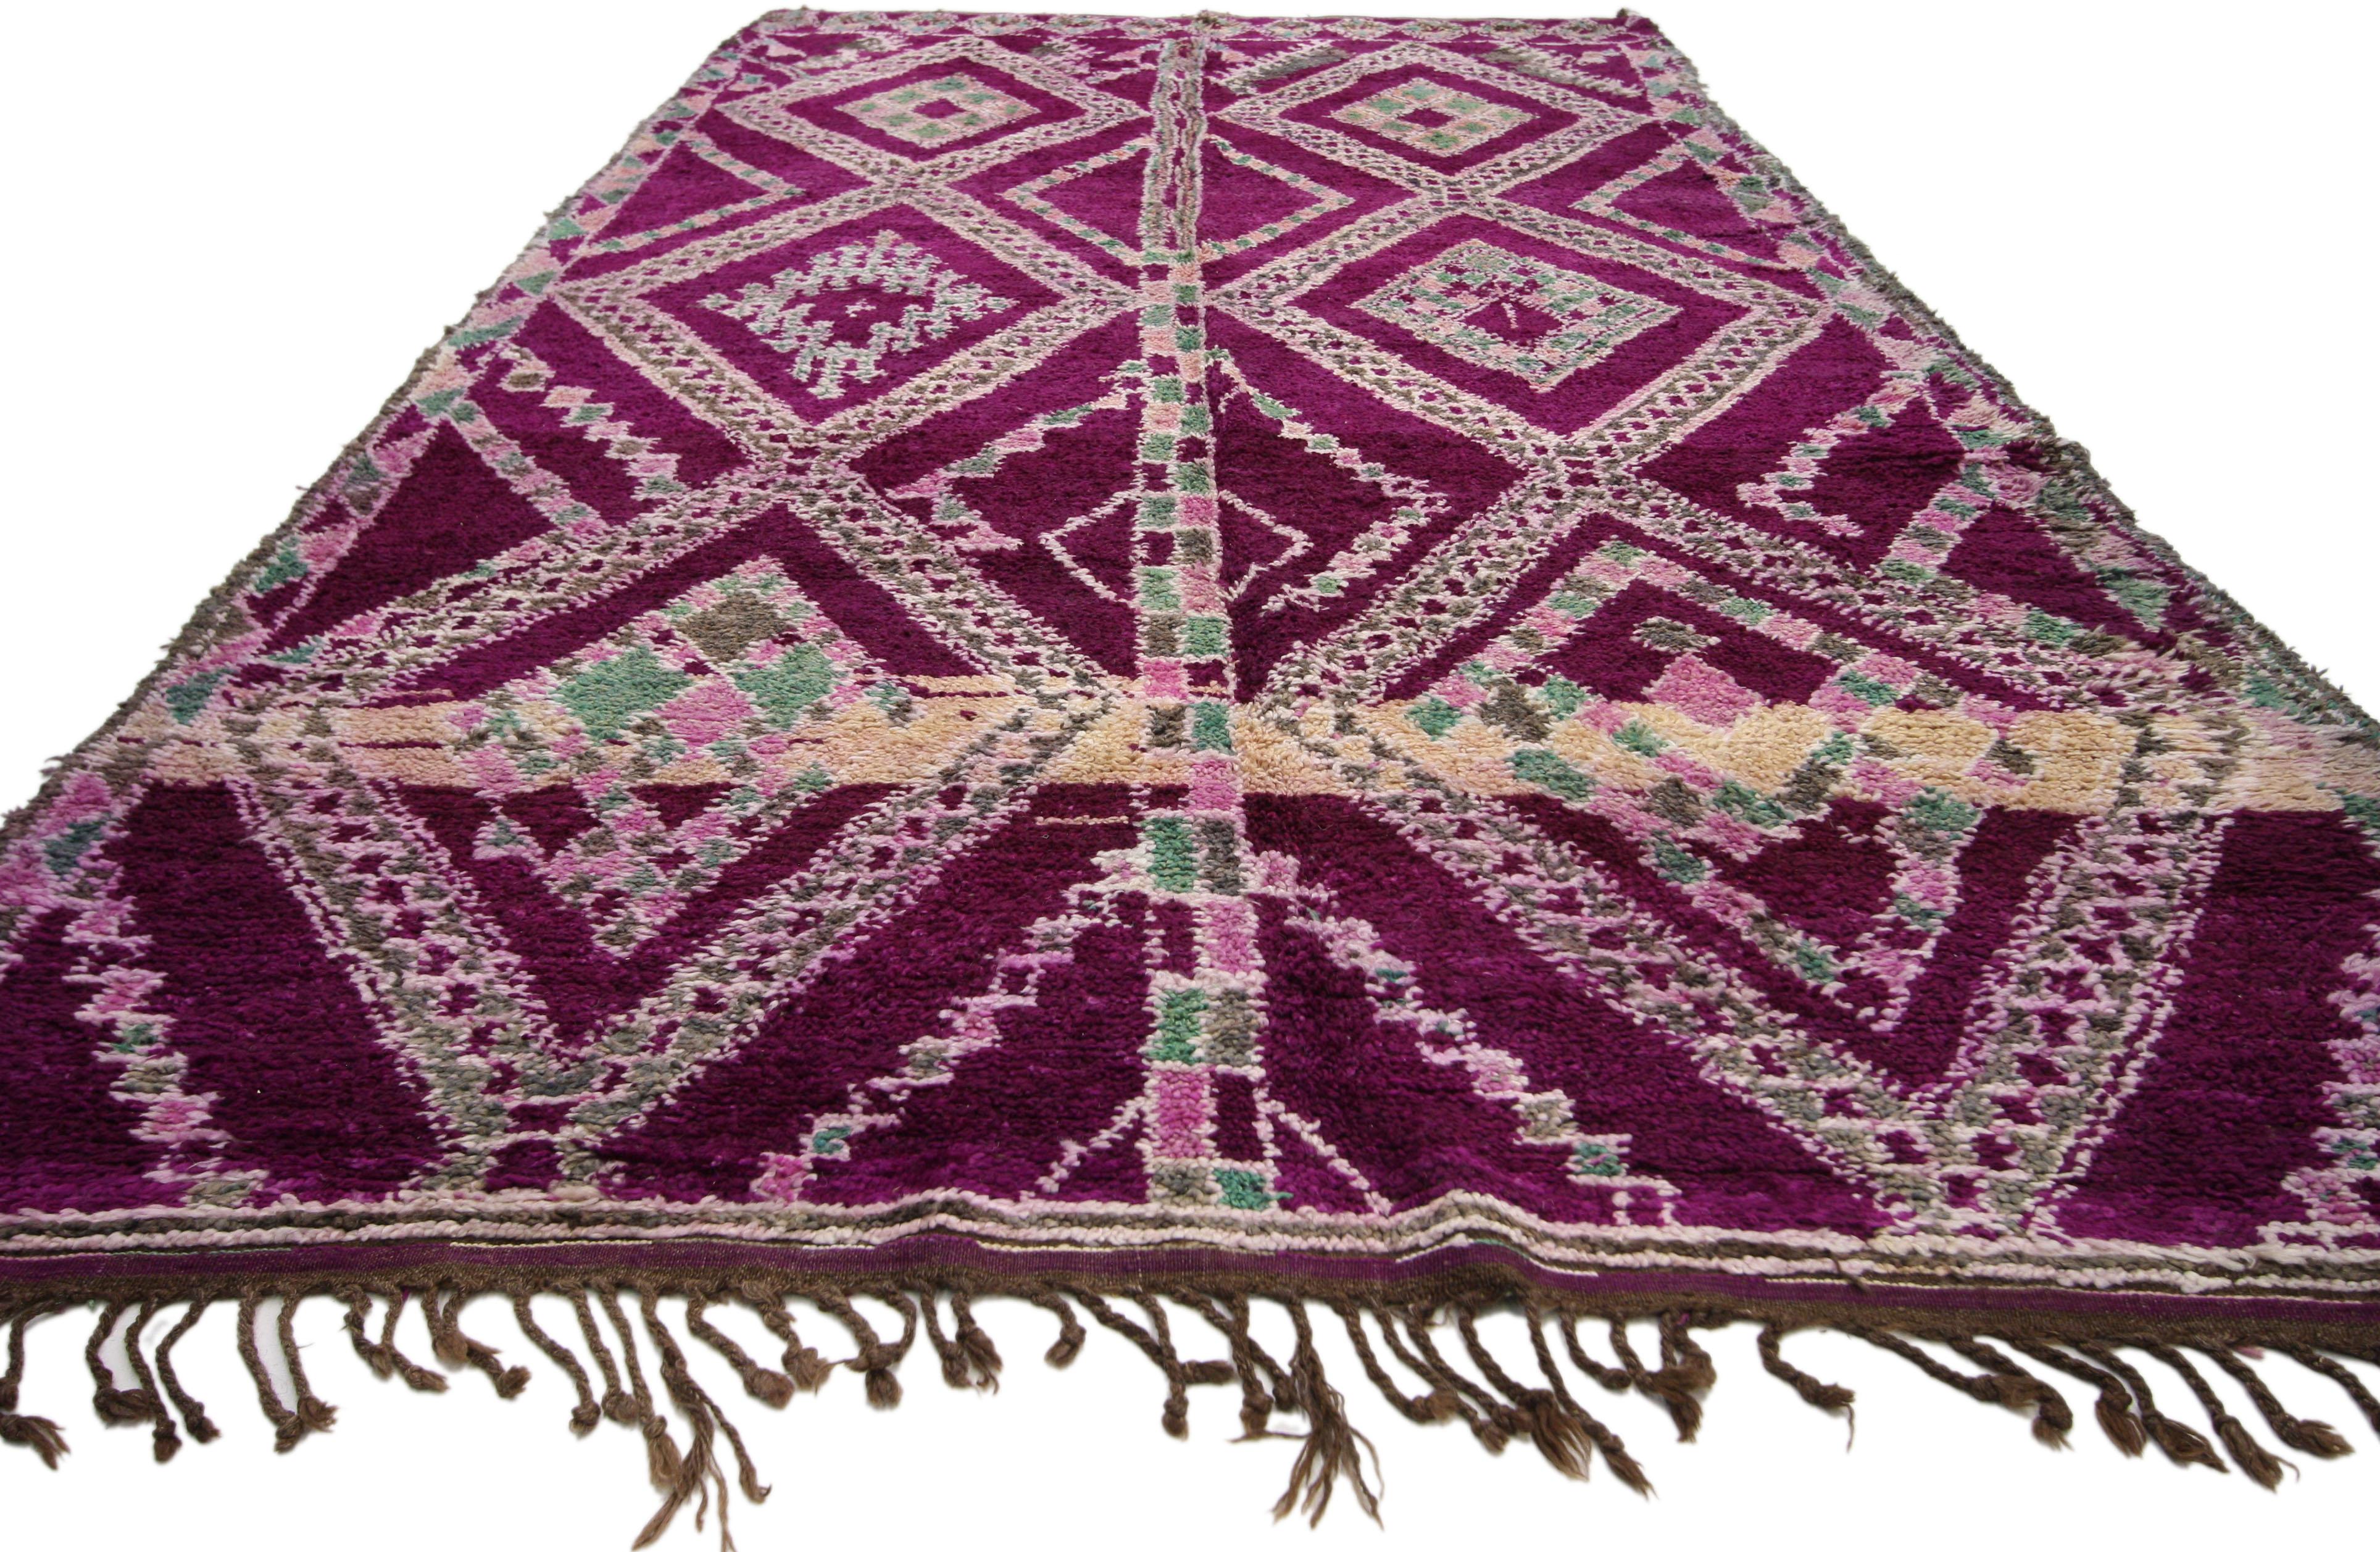 20684 Vintage Magenta-Purple Beni M'Guild Moroccan Rug with Tribal Bohemian Style 06'01 x 12'00. Rich waves of abrash and the tribal appeal of nomadic charm, the magenta and purple hues provide the perfect backdrop for tribal style and add a hint of